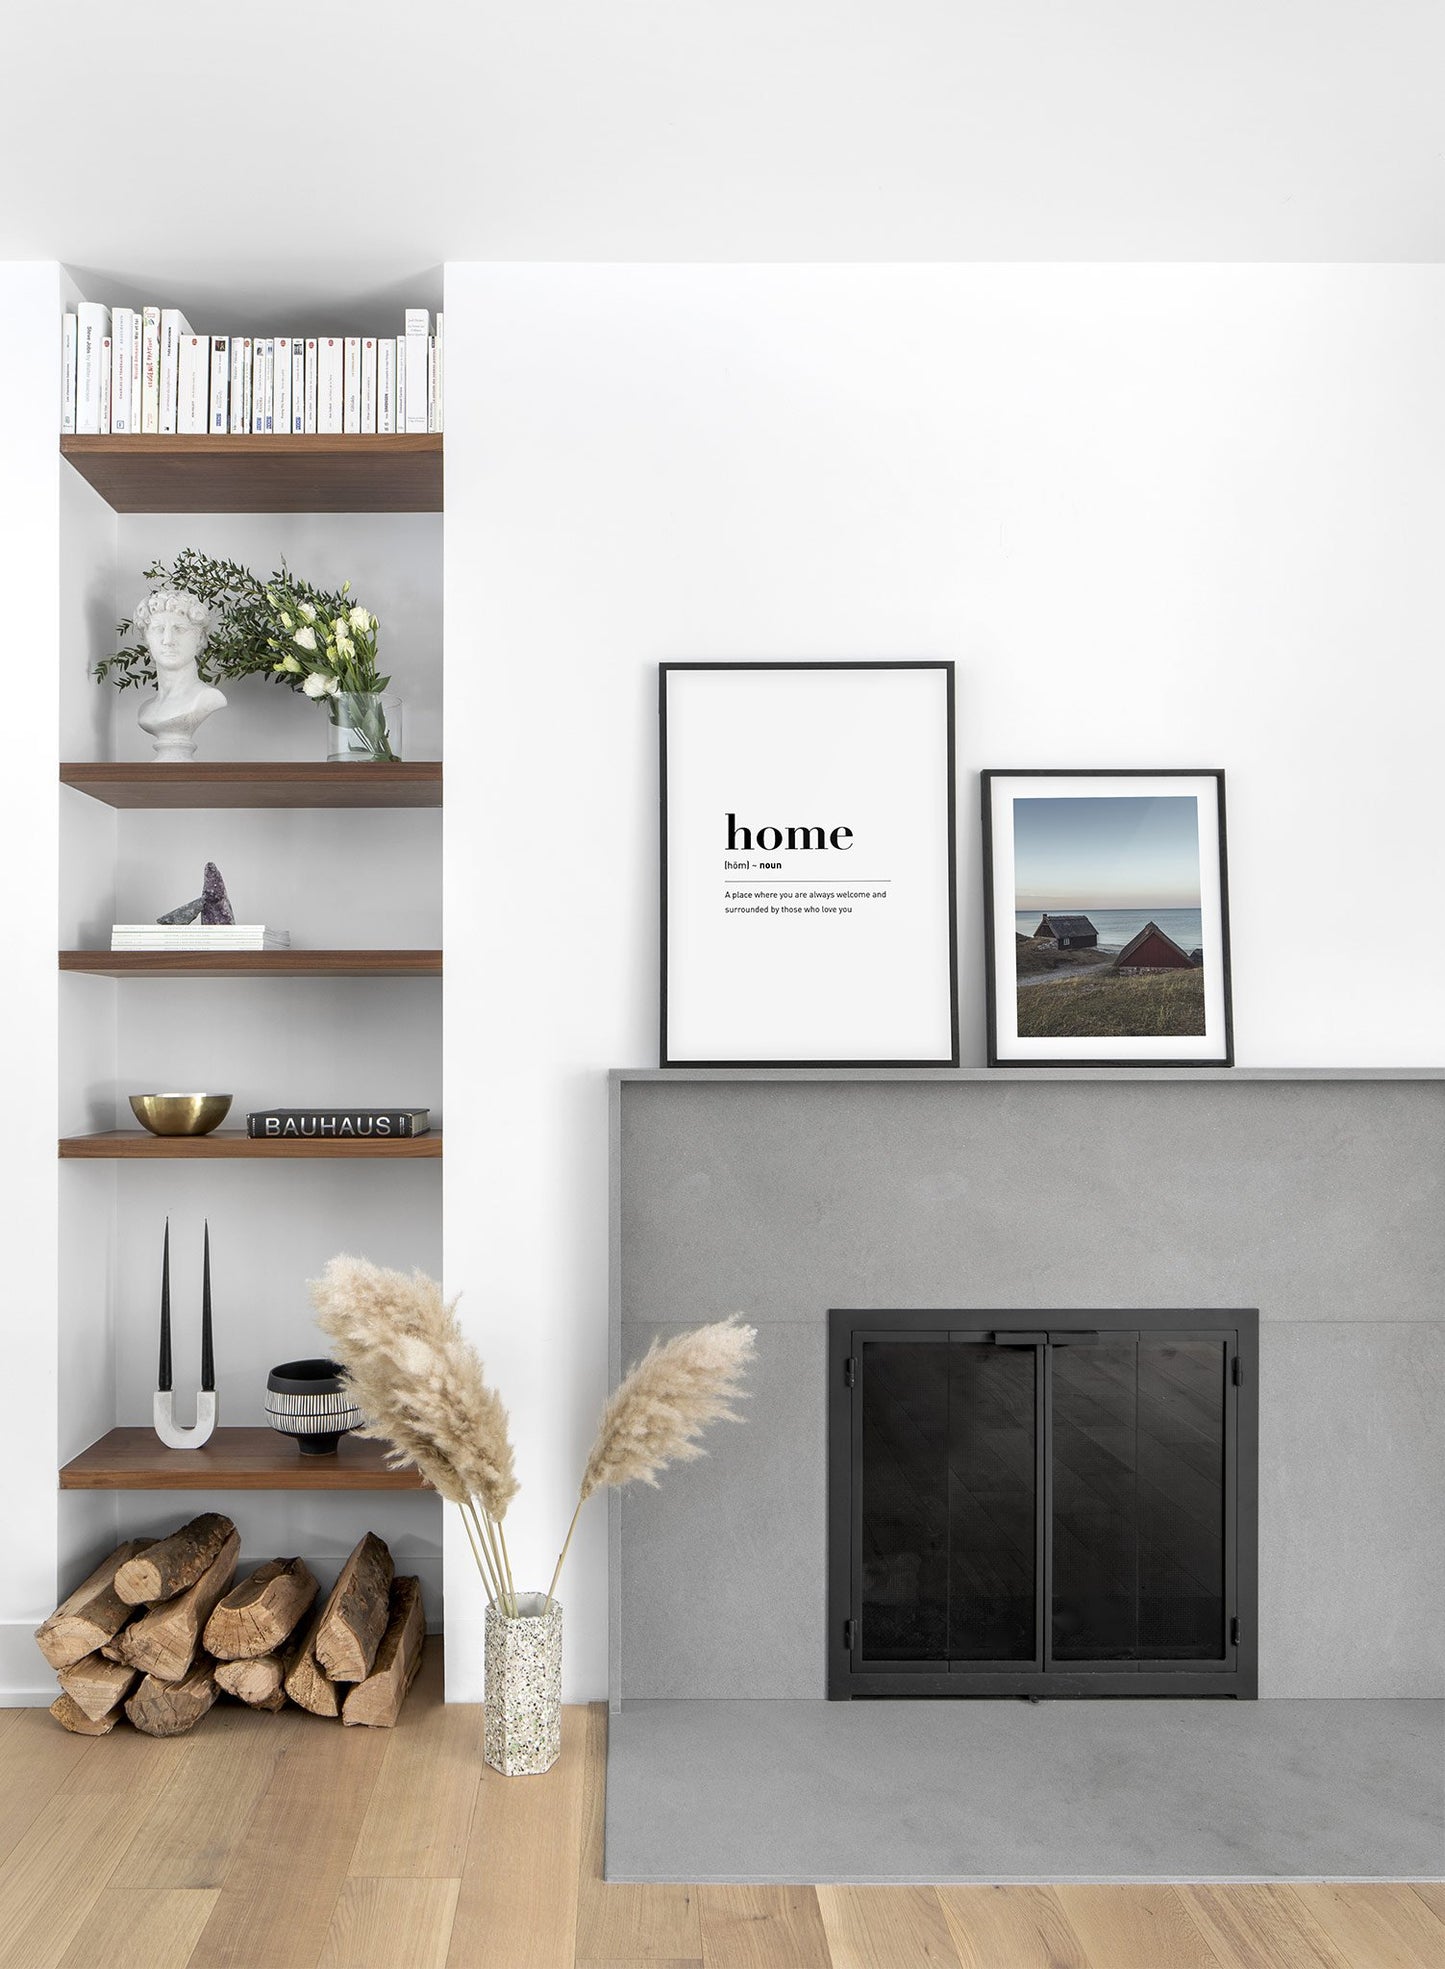 Scandinavian poster with black and white graphic typography design of Home text by Opposite Wall - Lifestyle Duo - Living Room Fireplace